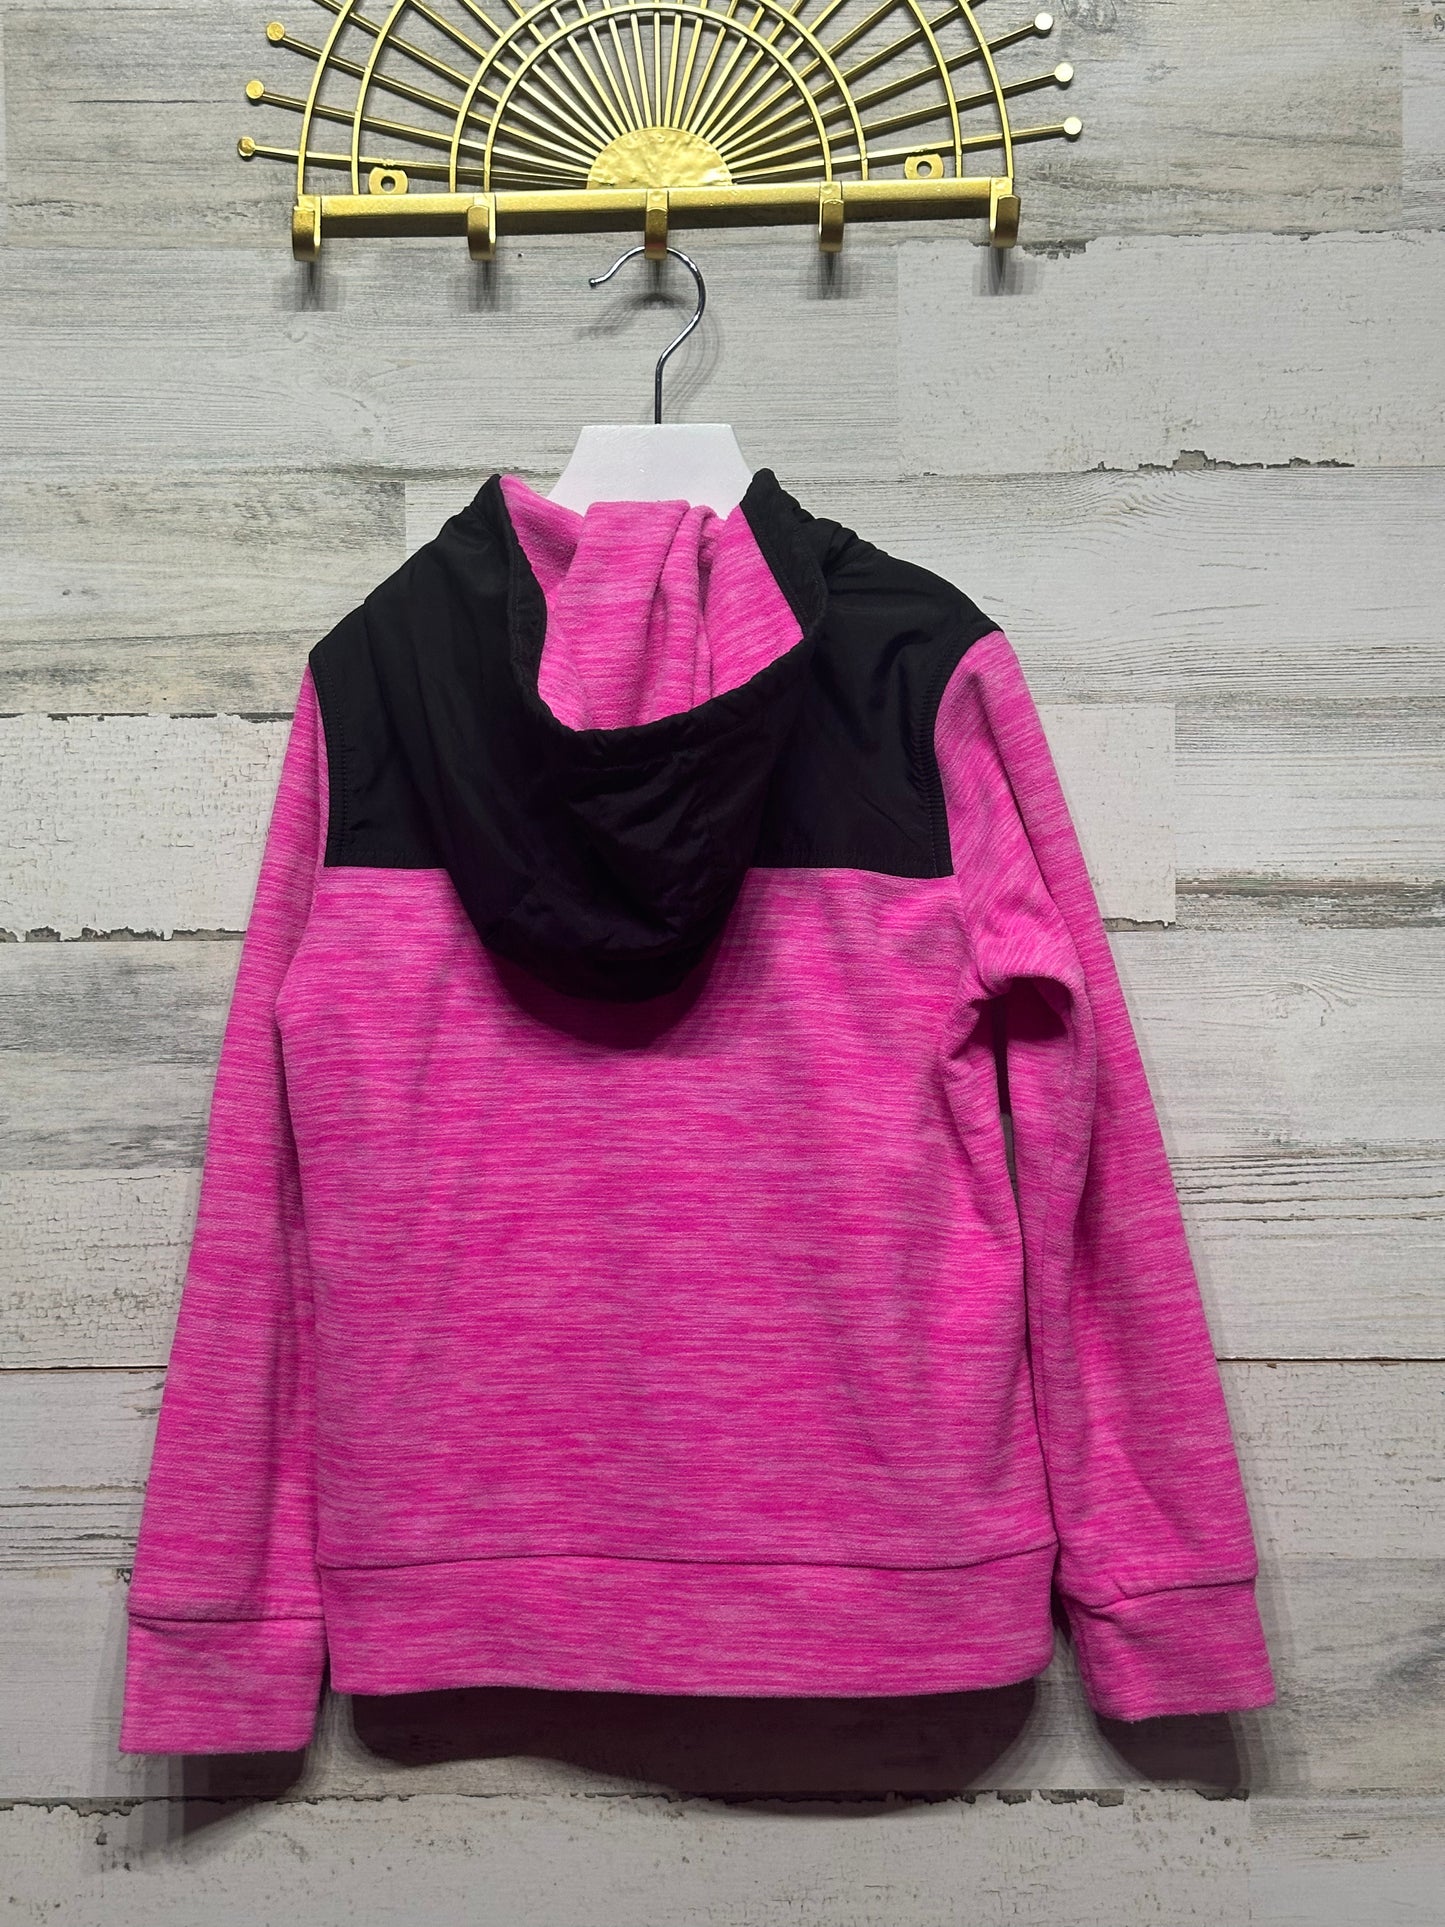 Girls Size Small (7/8) Puma Pink Fleece Jacket  - Very Good Used Condition